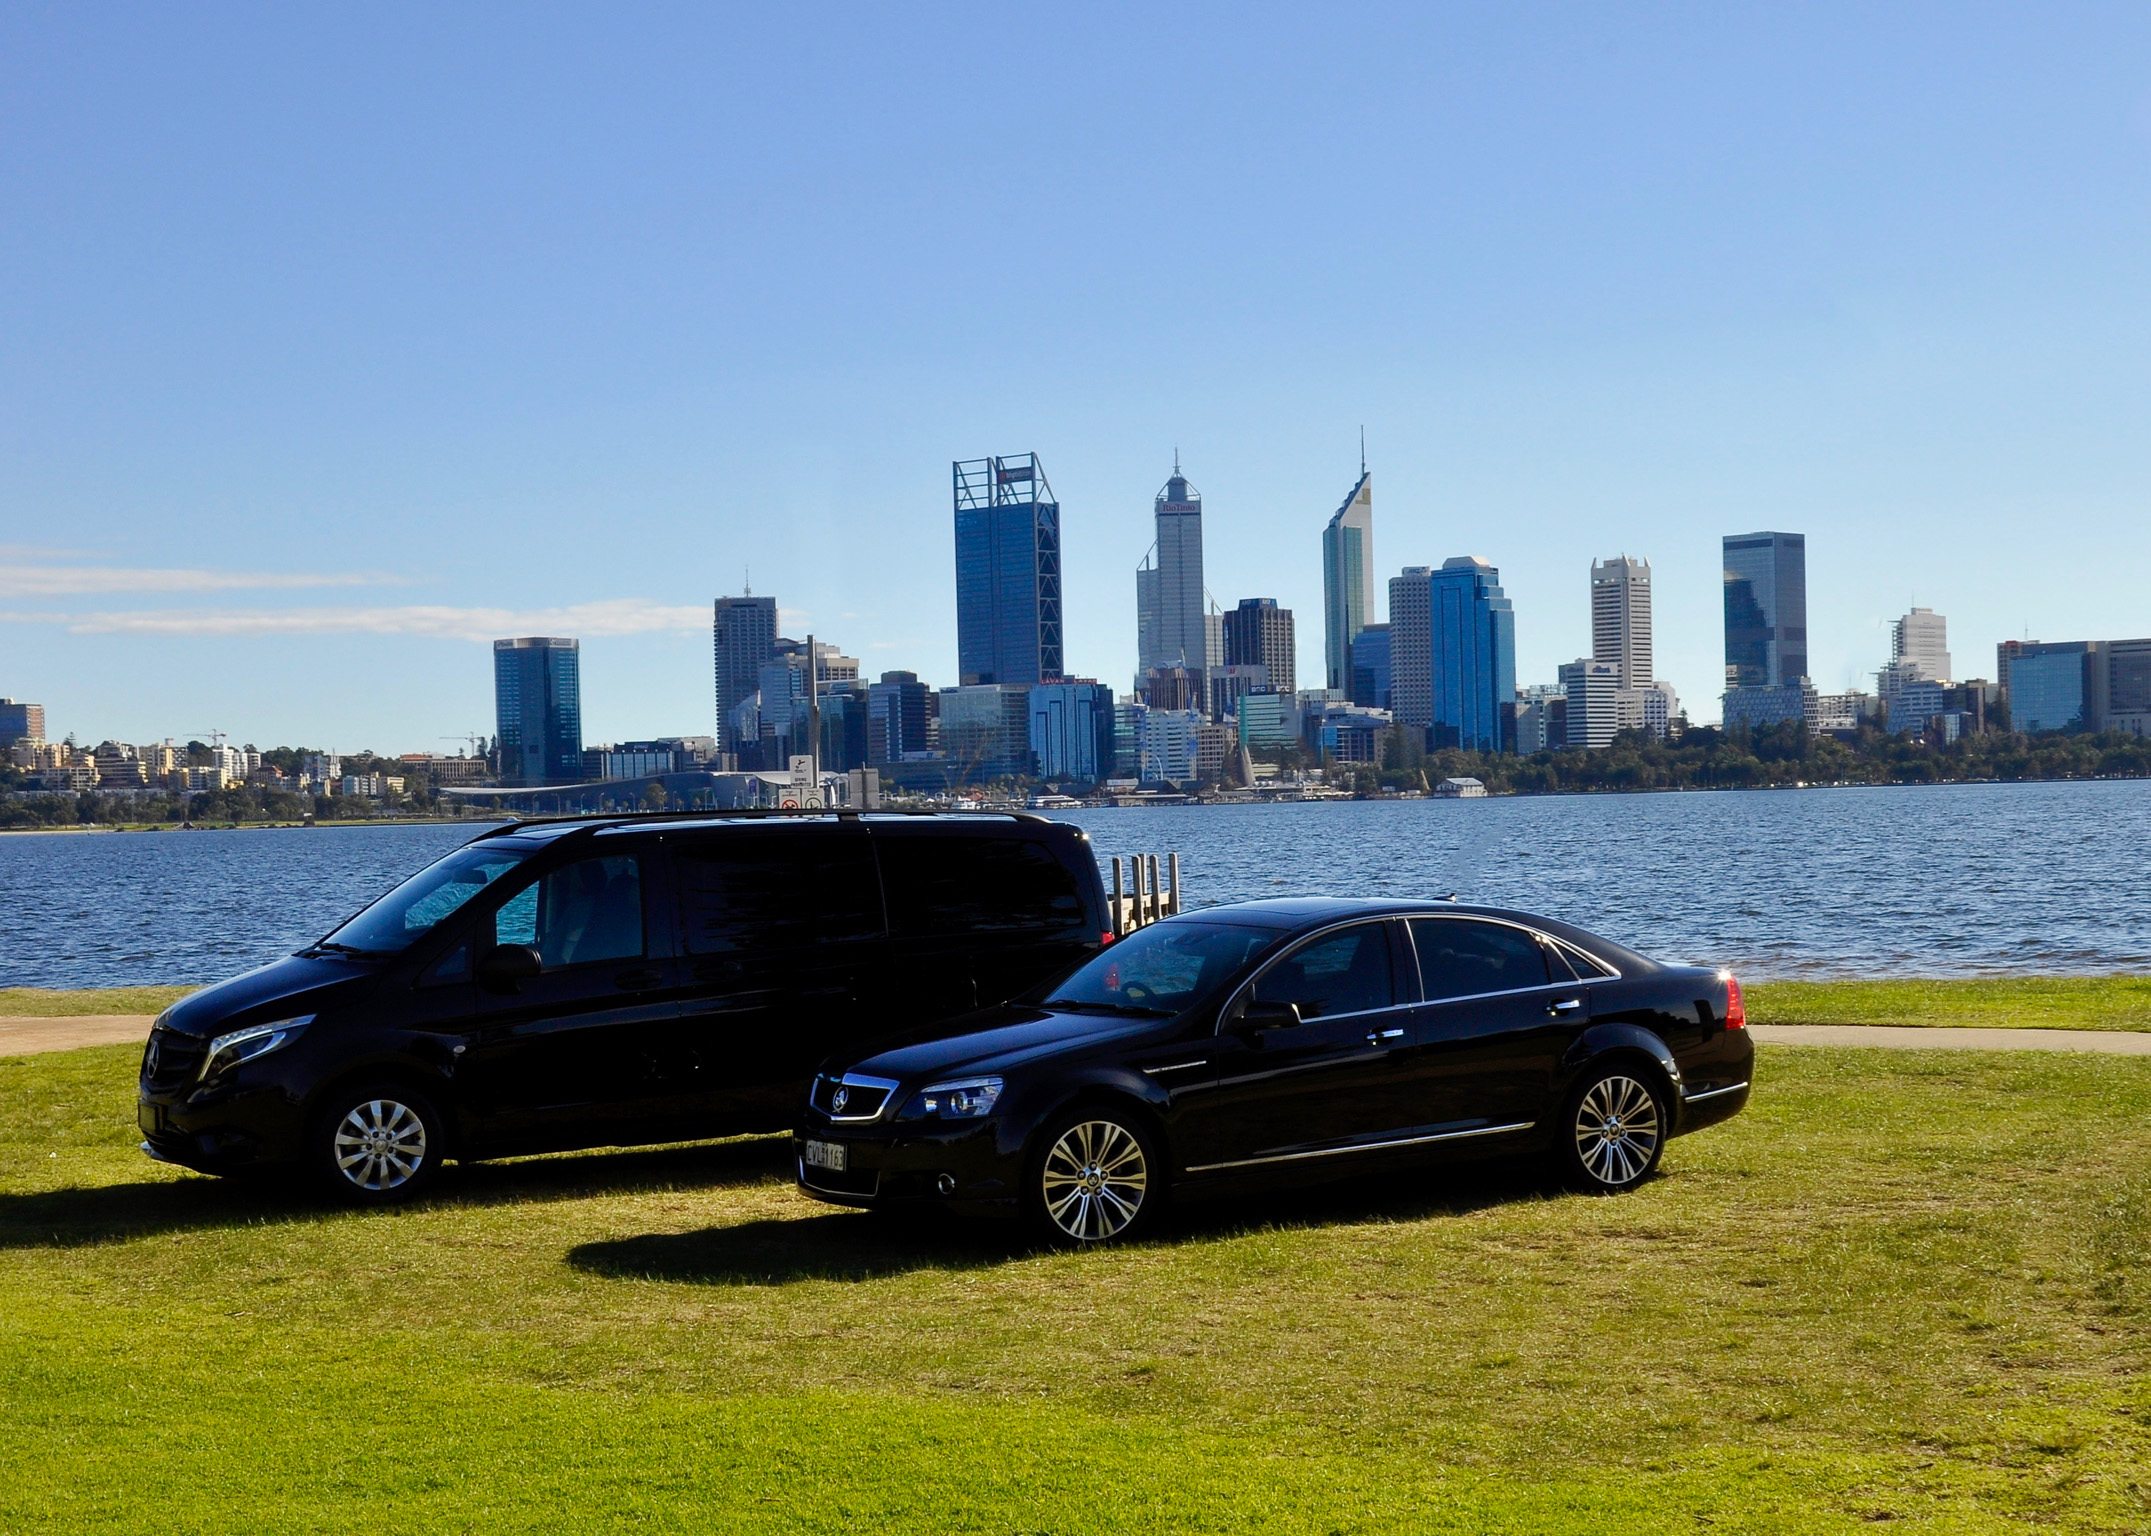 Hire our Mercedes V Series and driver for the day-sit back and relax and let us do the driving